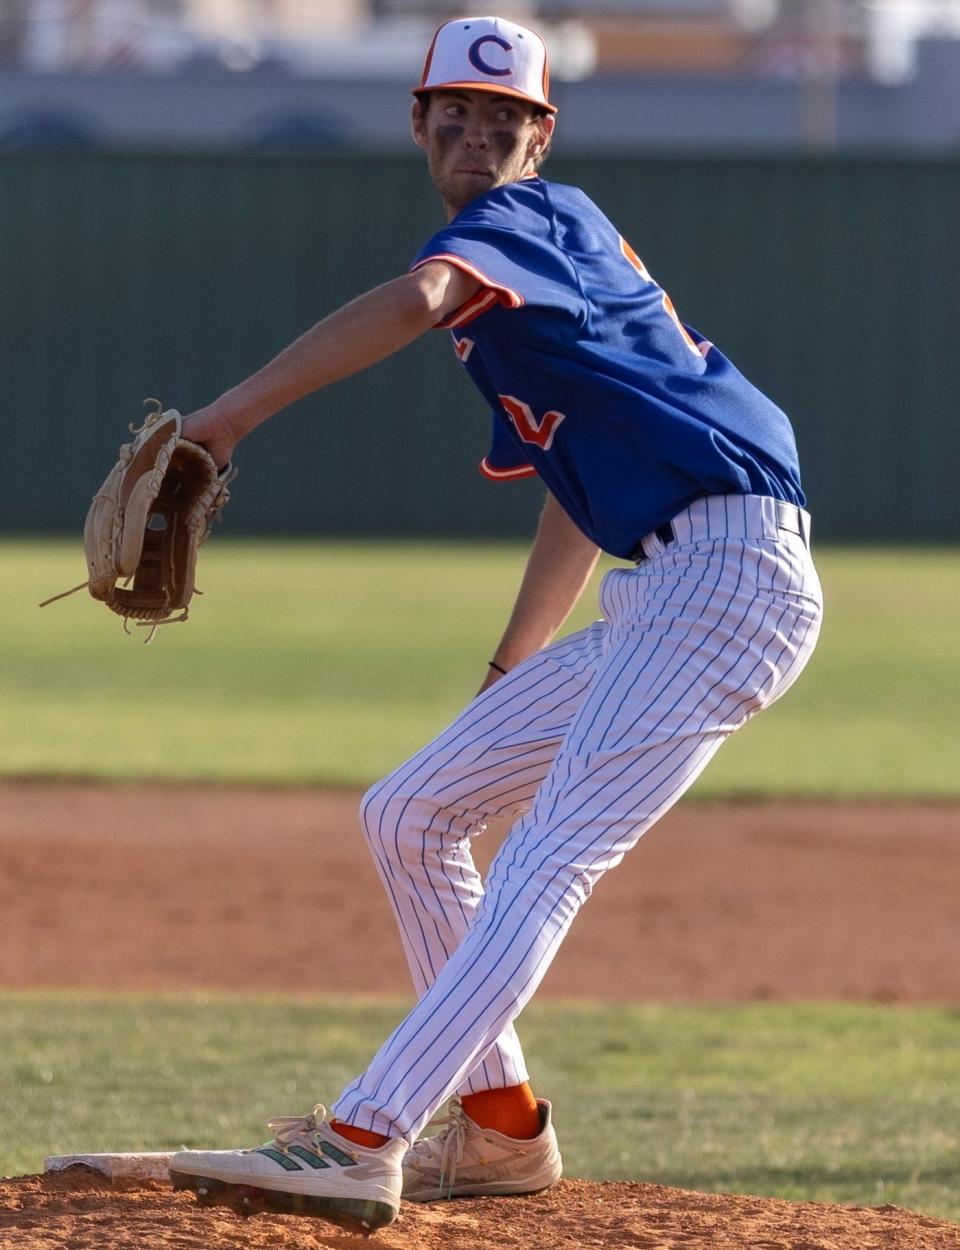 San Angelo Central High School pitcher Hunter Weidner gets ready to fire a pitch against Abilene High at Nathan Donsky Field on Tuesday, March 29, 2022.